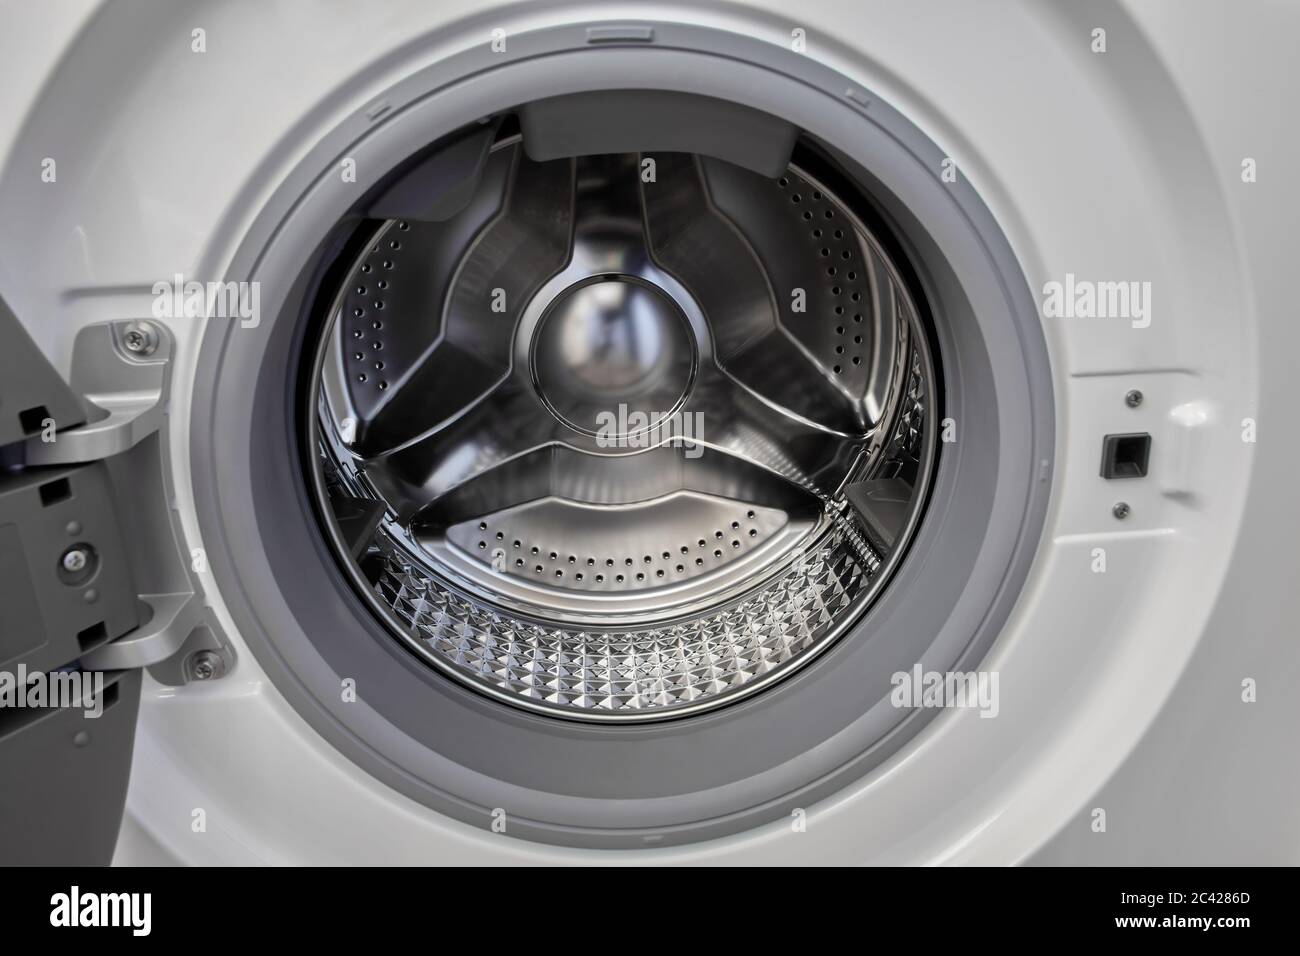 The open door of the automatic washing machine shows an empty steel inner drum. Diamond design running on these drums. Stock Photo